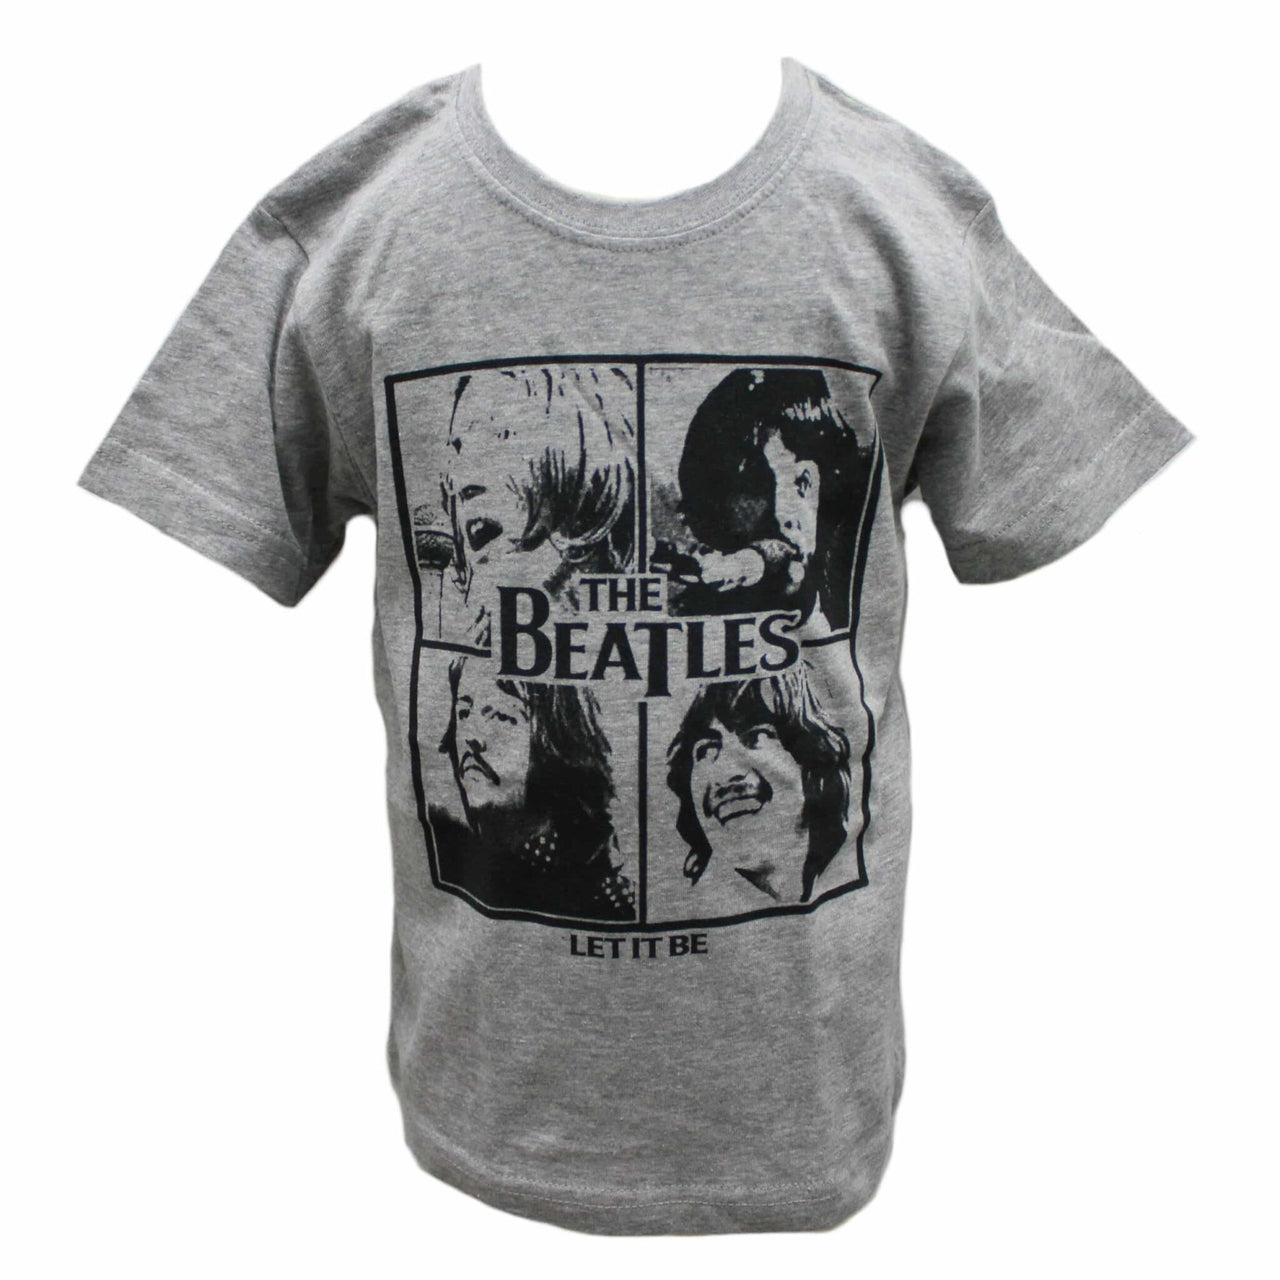 The Beatles Let it Be Kids Gray T-Shirt